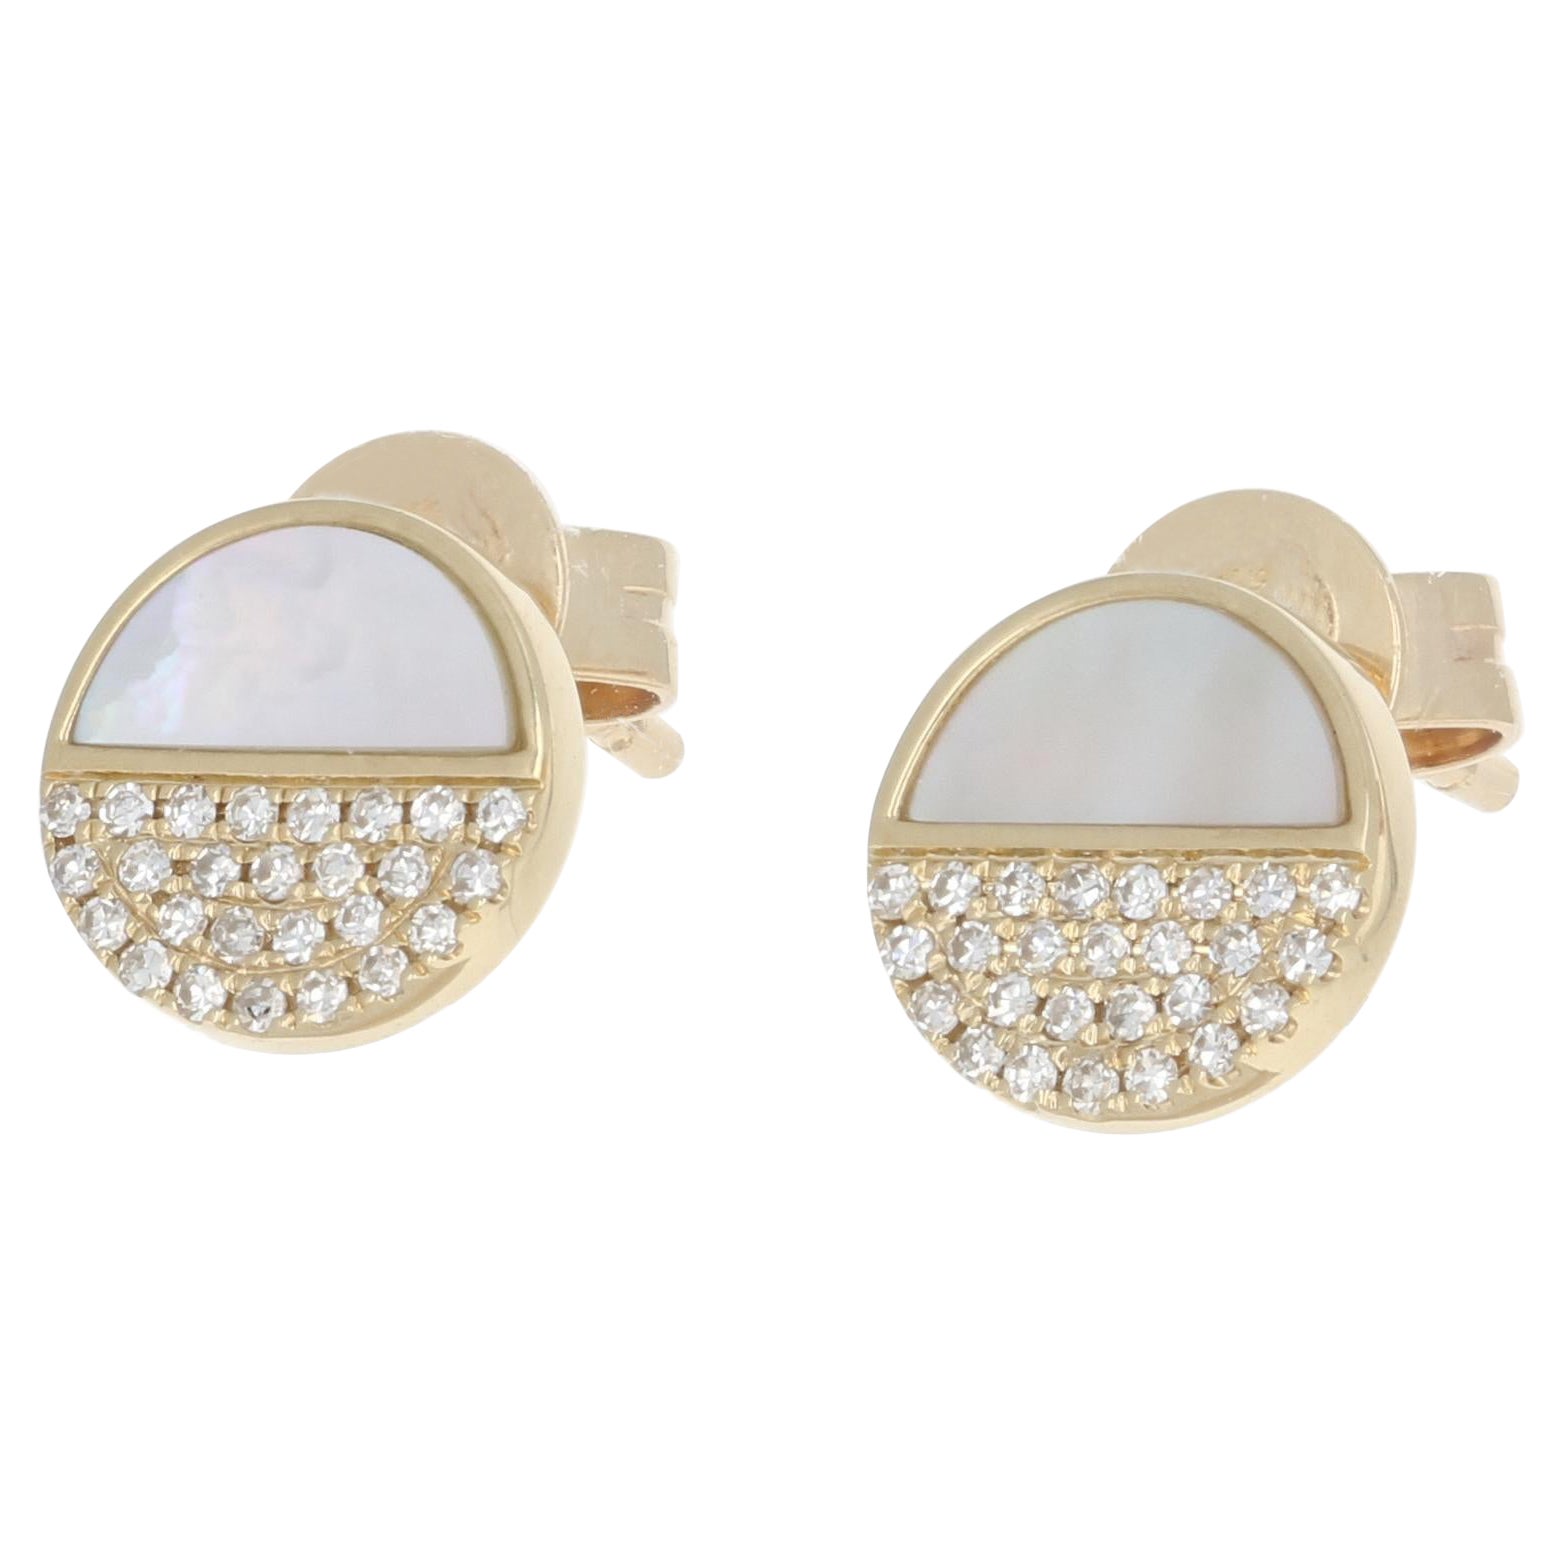 New Mother of Pearl & Diamond Circle Earrings, 14k Gold Pierced Studs .12ctw For Sale